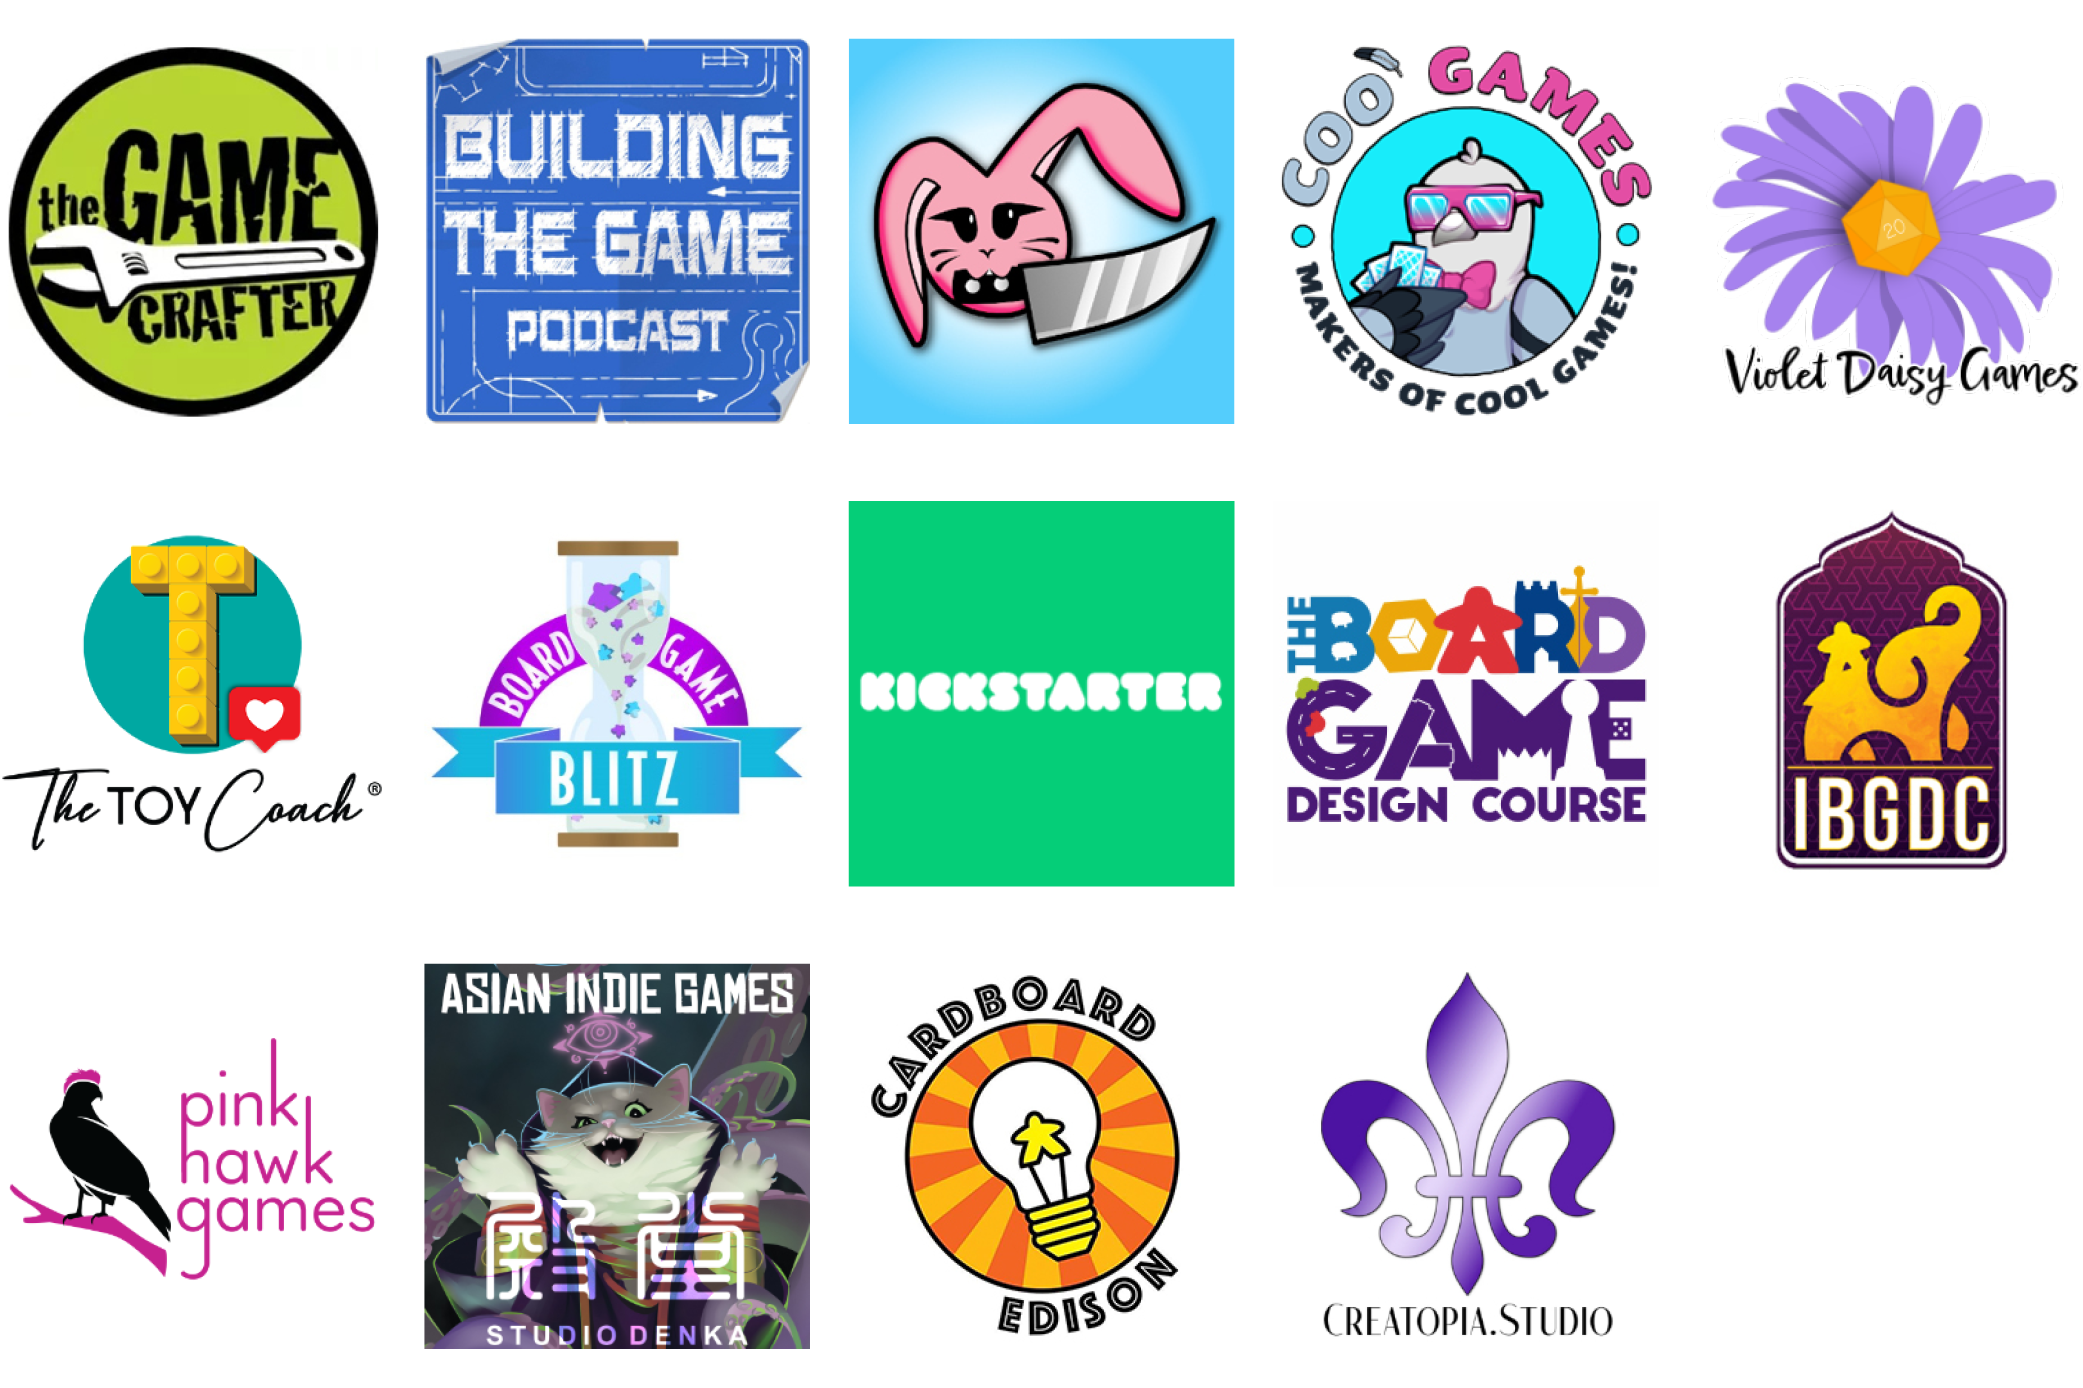 Sponsor logos for Jan 2024: Sponsor logos for Jan 2024: The Game Crafter, Building the Game Podcast, Knife Bunny, Coo Games, Violet Daisy Games, The Toy Coach, Board Game Blitz, Kickstarter, The Board Game Design Course, IBGDC, Pink Hawk Games, Studio Denka, Cardboard Edison, Creatopia